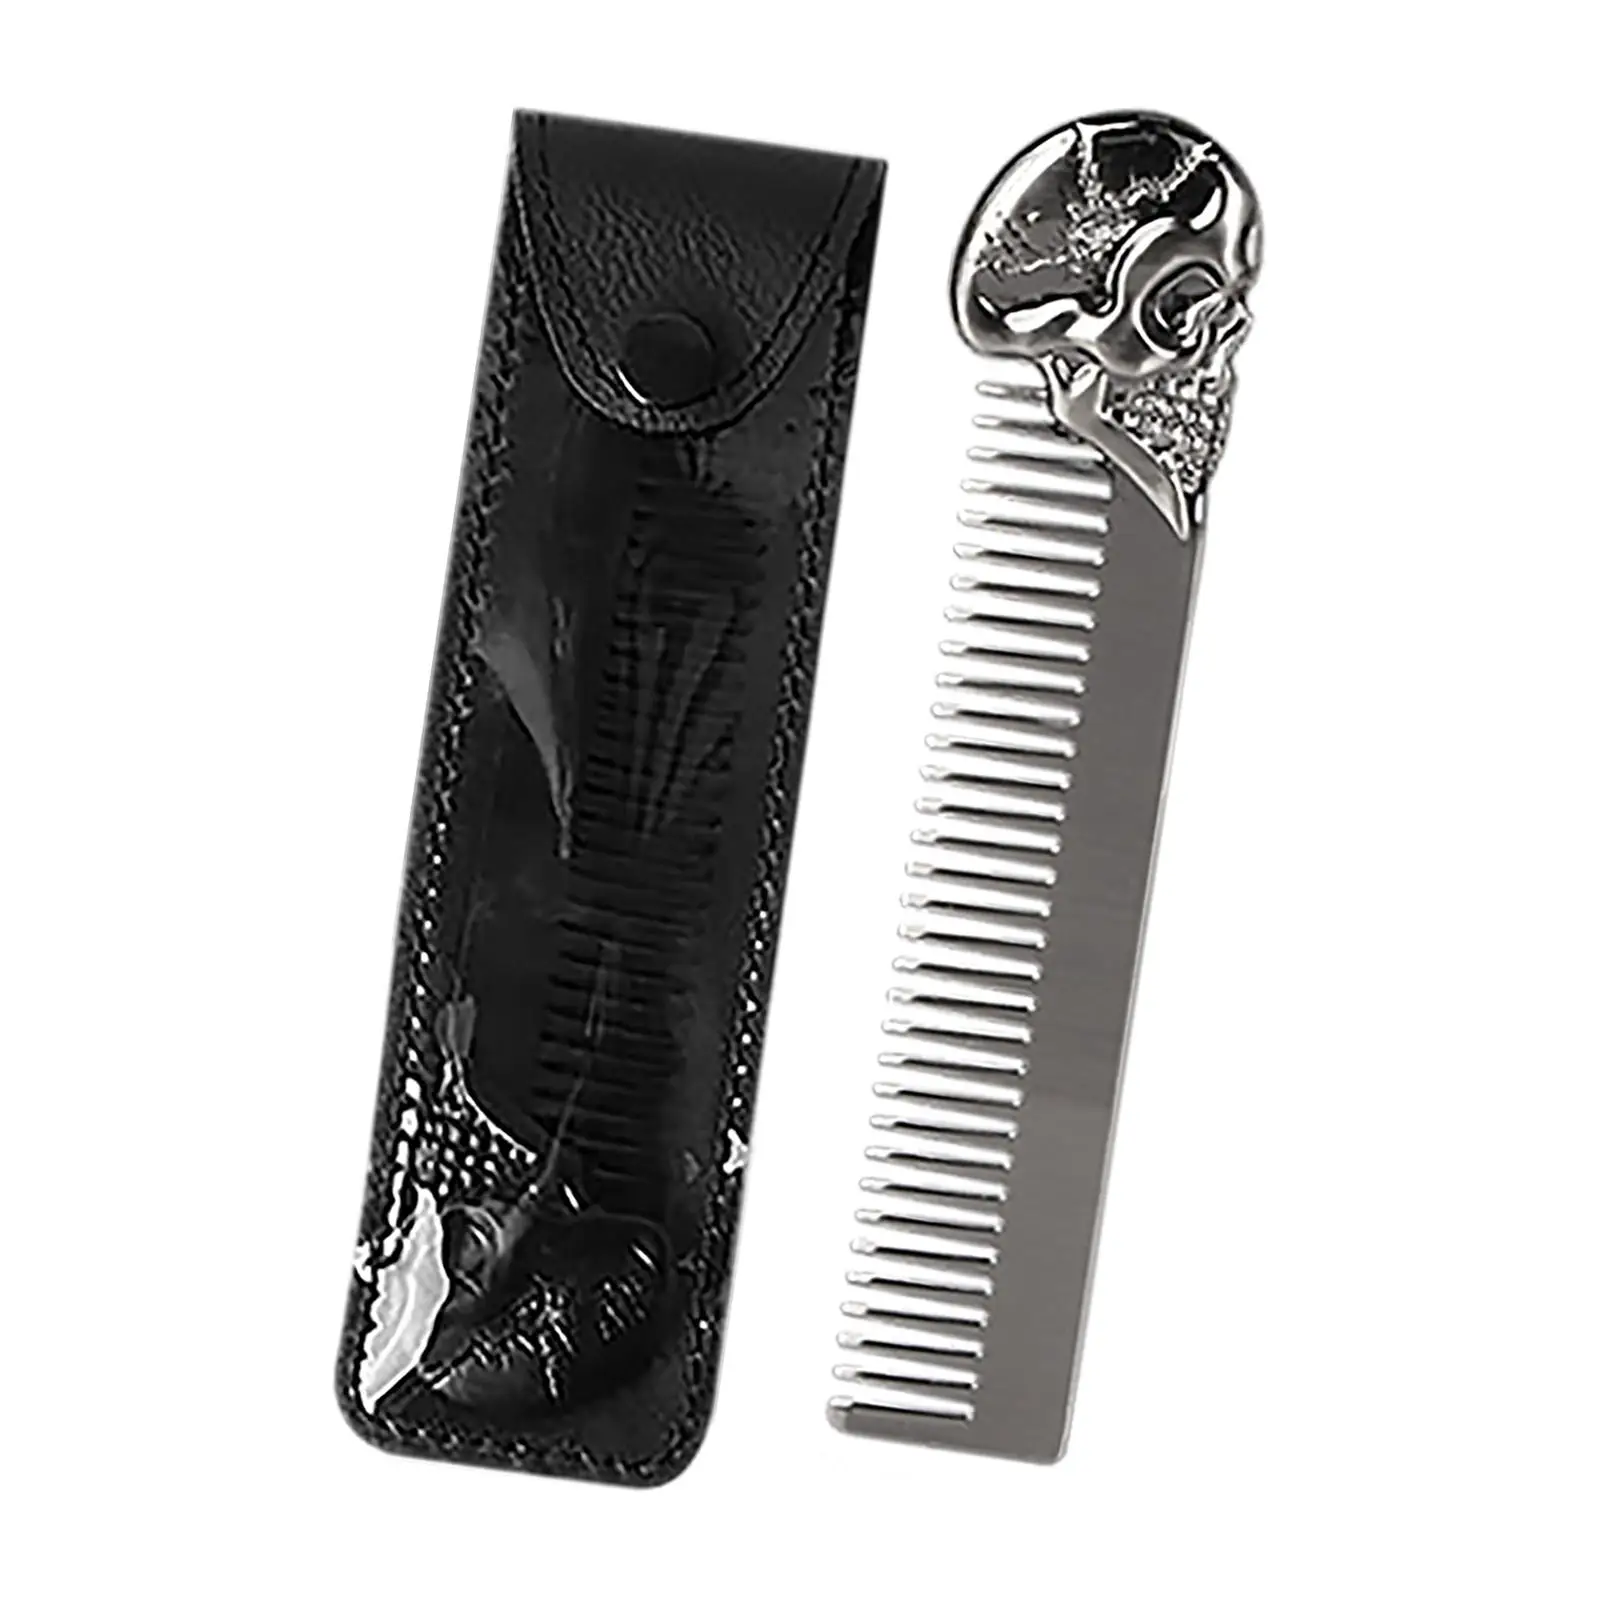 Men Beard Comb Fine Tooth   Grooming Hair Styling Trimming Tool